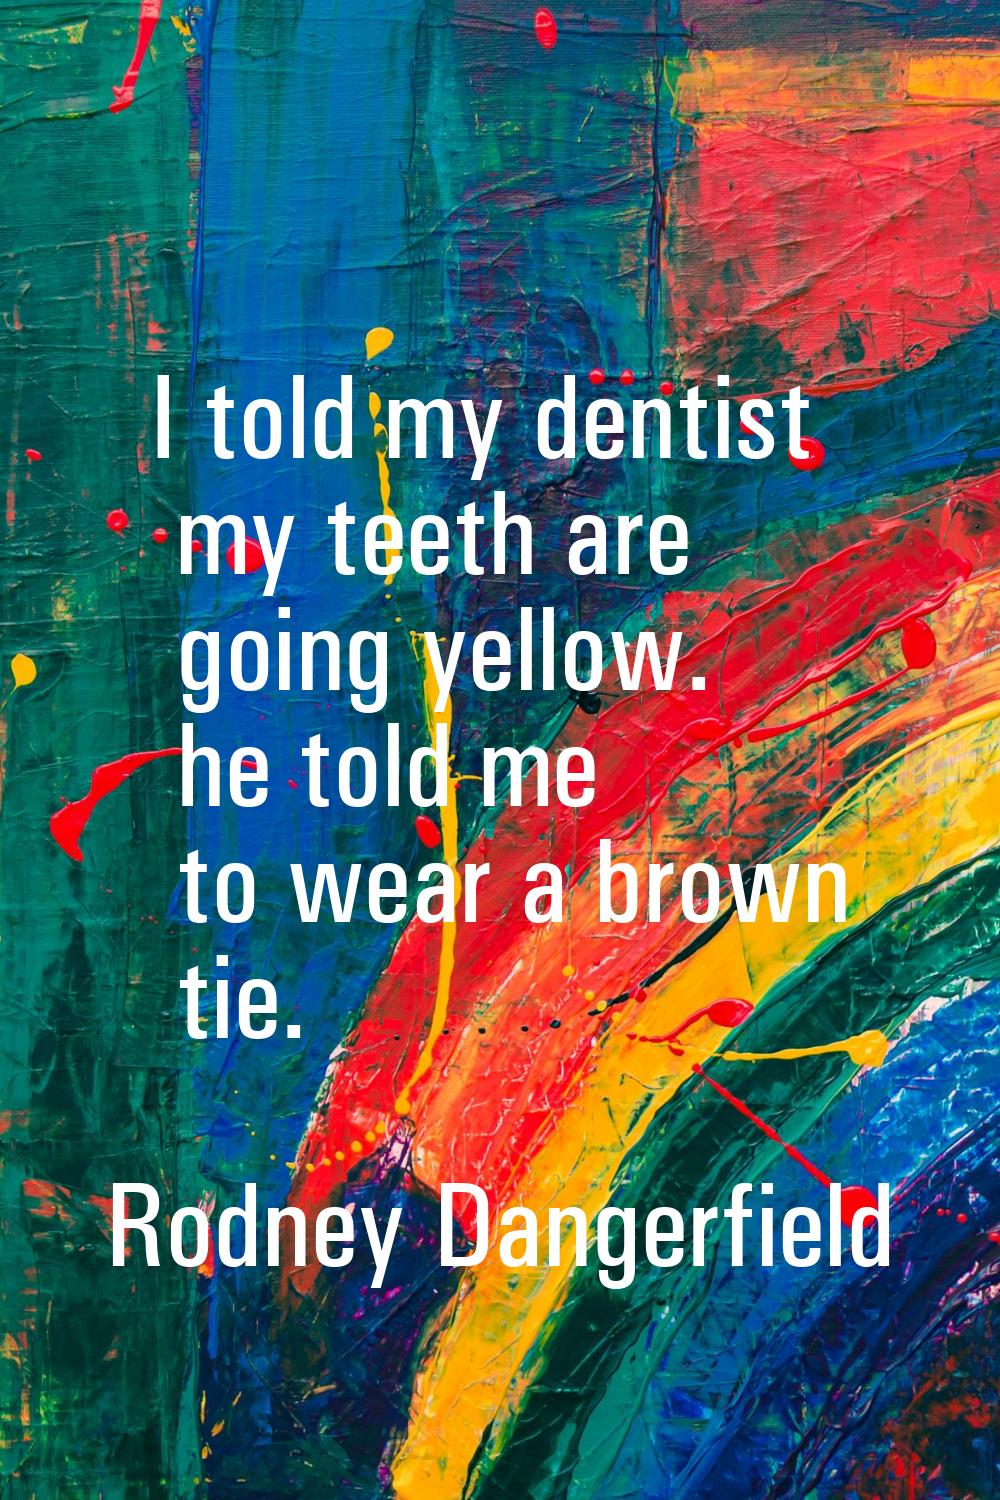 I told my dentist my teeth are going yellow. he told me to wear a brown tie.